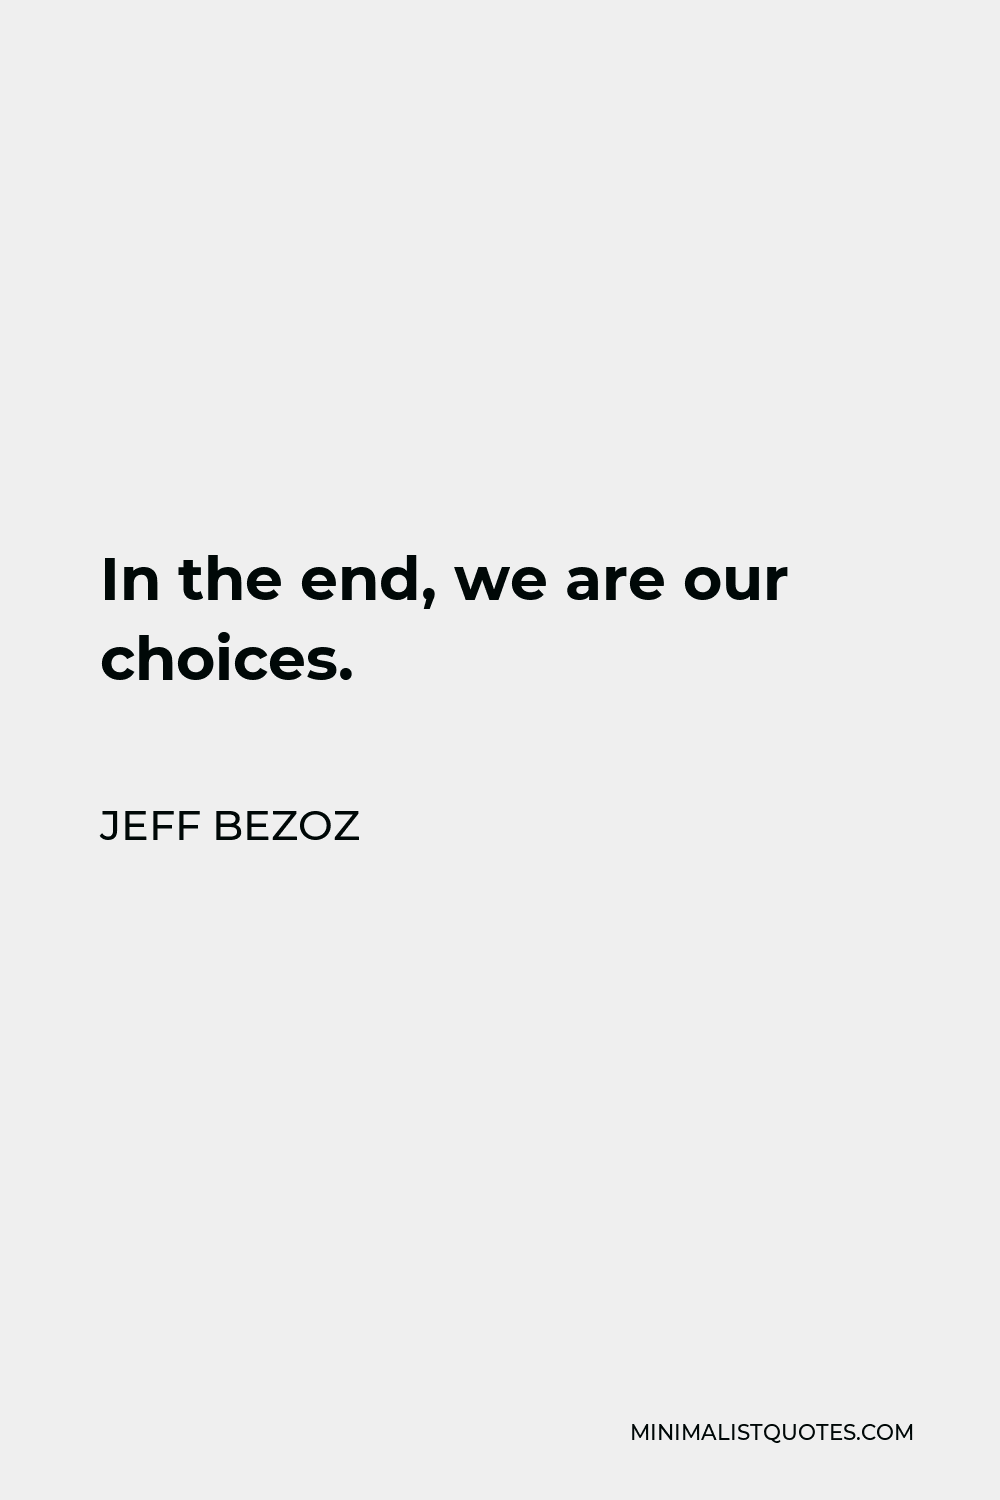 Jeff Bezoz Quote - In the end, we are our choices.